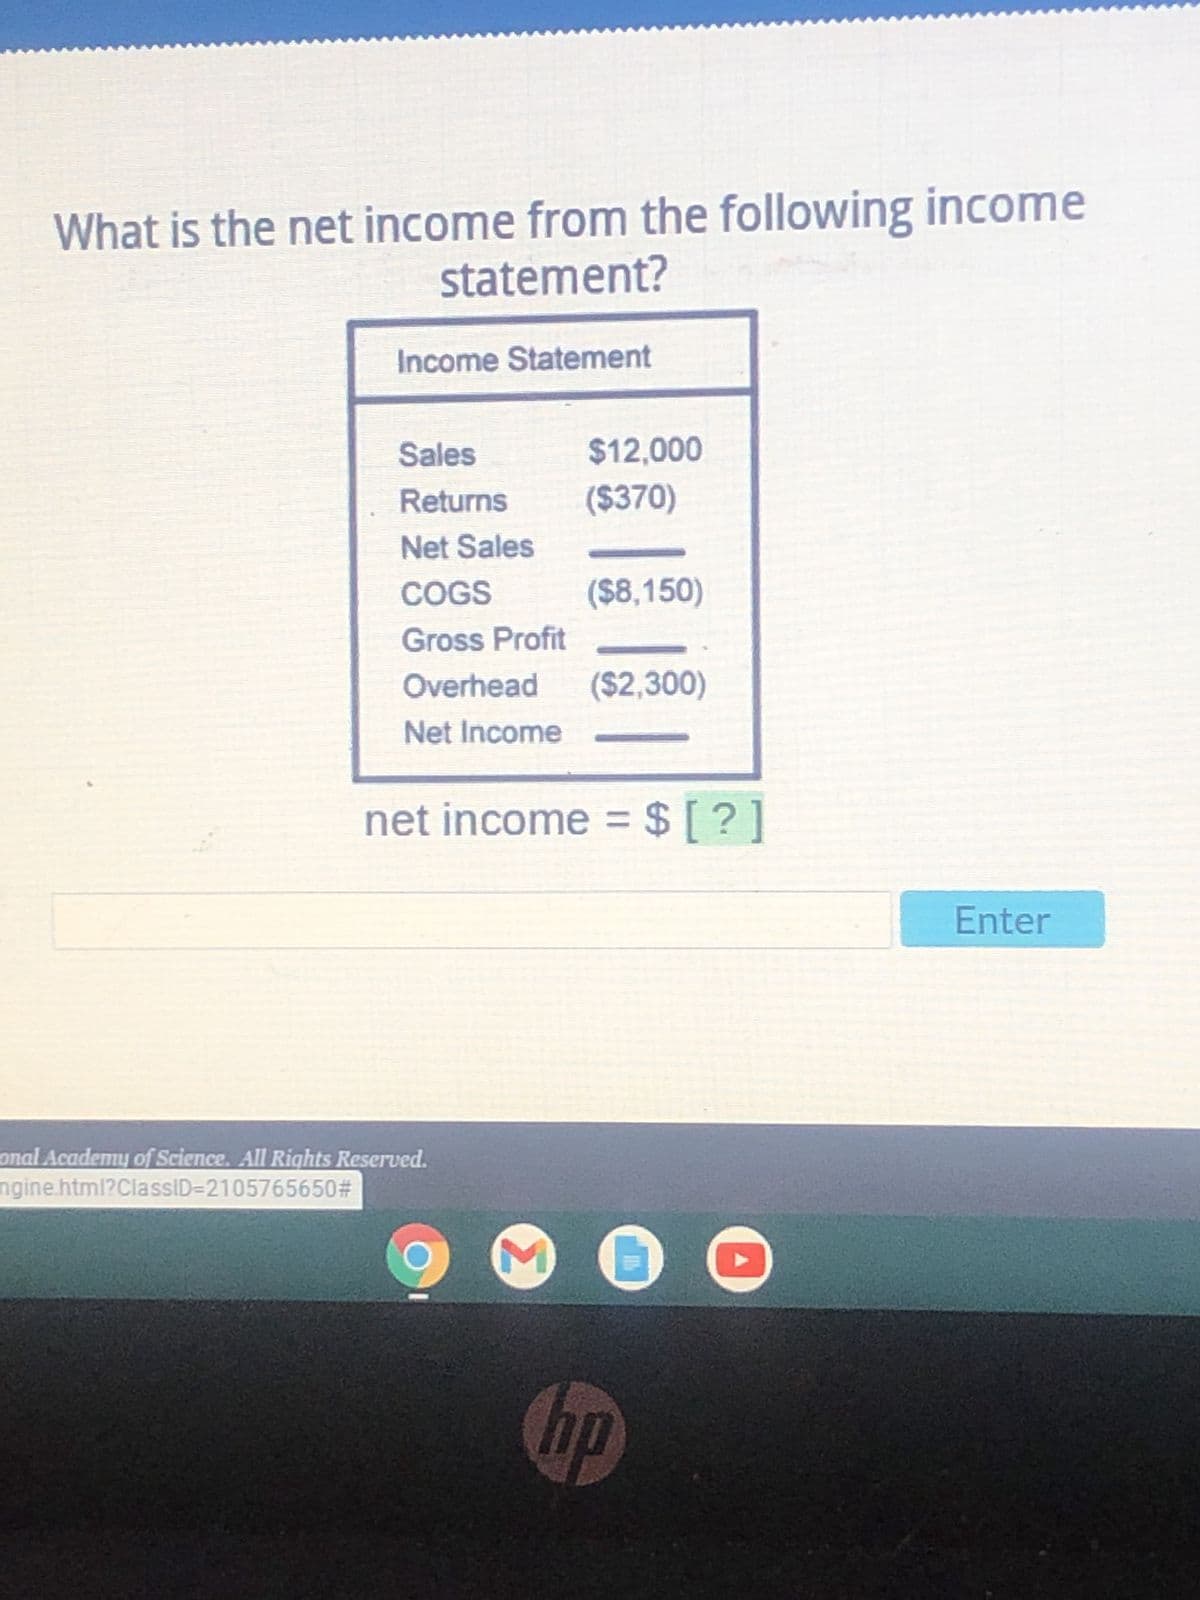 What is the net income from the following income
statement?
Income Statement
Sales
$12,000
Returns
($370)
Net Sales
COGS
($8,150)
Gross Profit
Overhead ($2,300)
Net Income
net income = $ [?]
M 0
hp
onal Academy of Science. All Rights Reserved.
ngine.html?ClassID=2105765650#
Enter